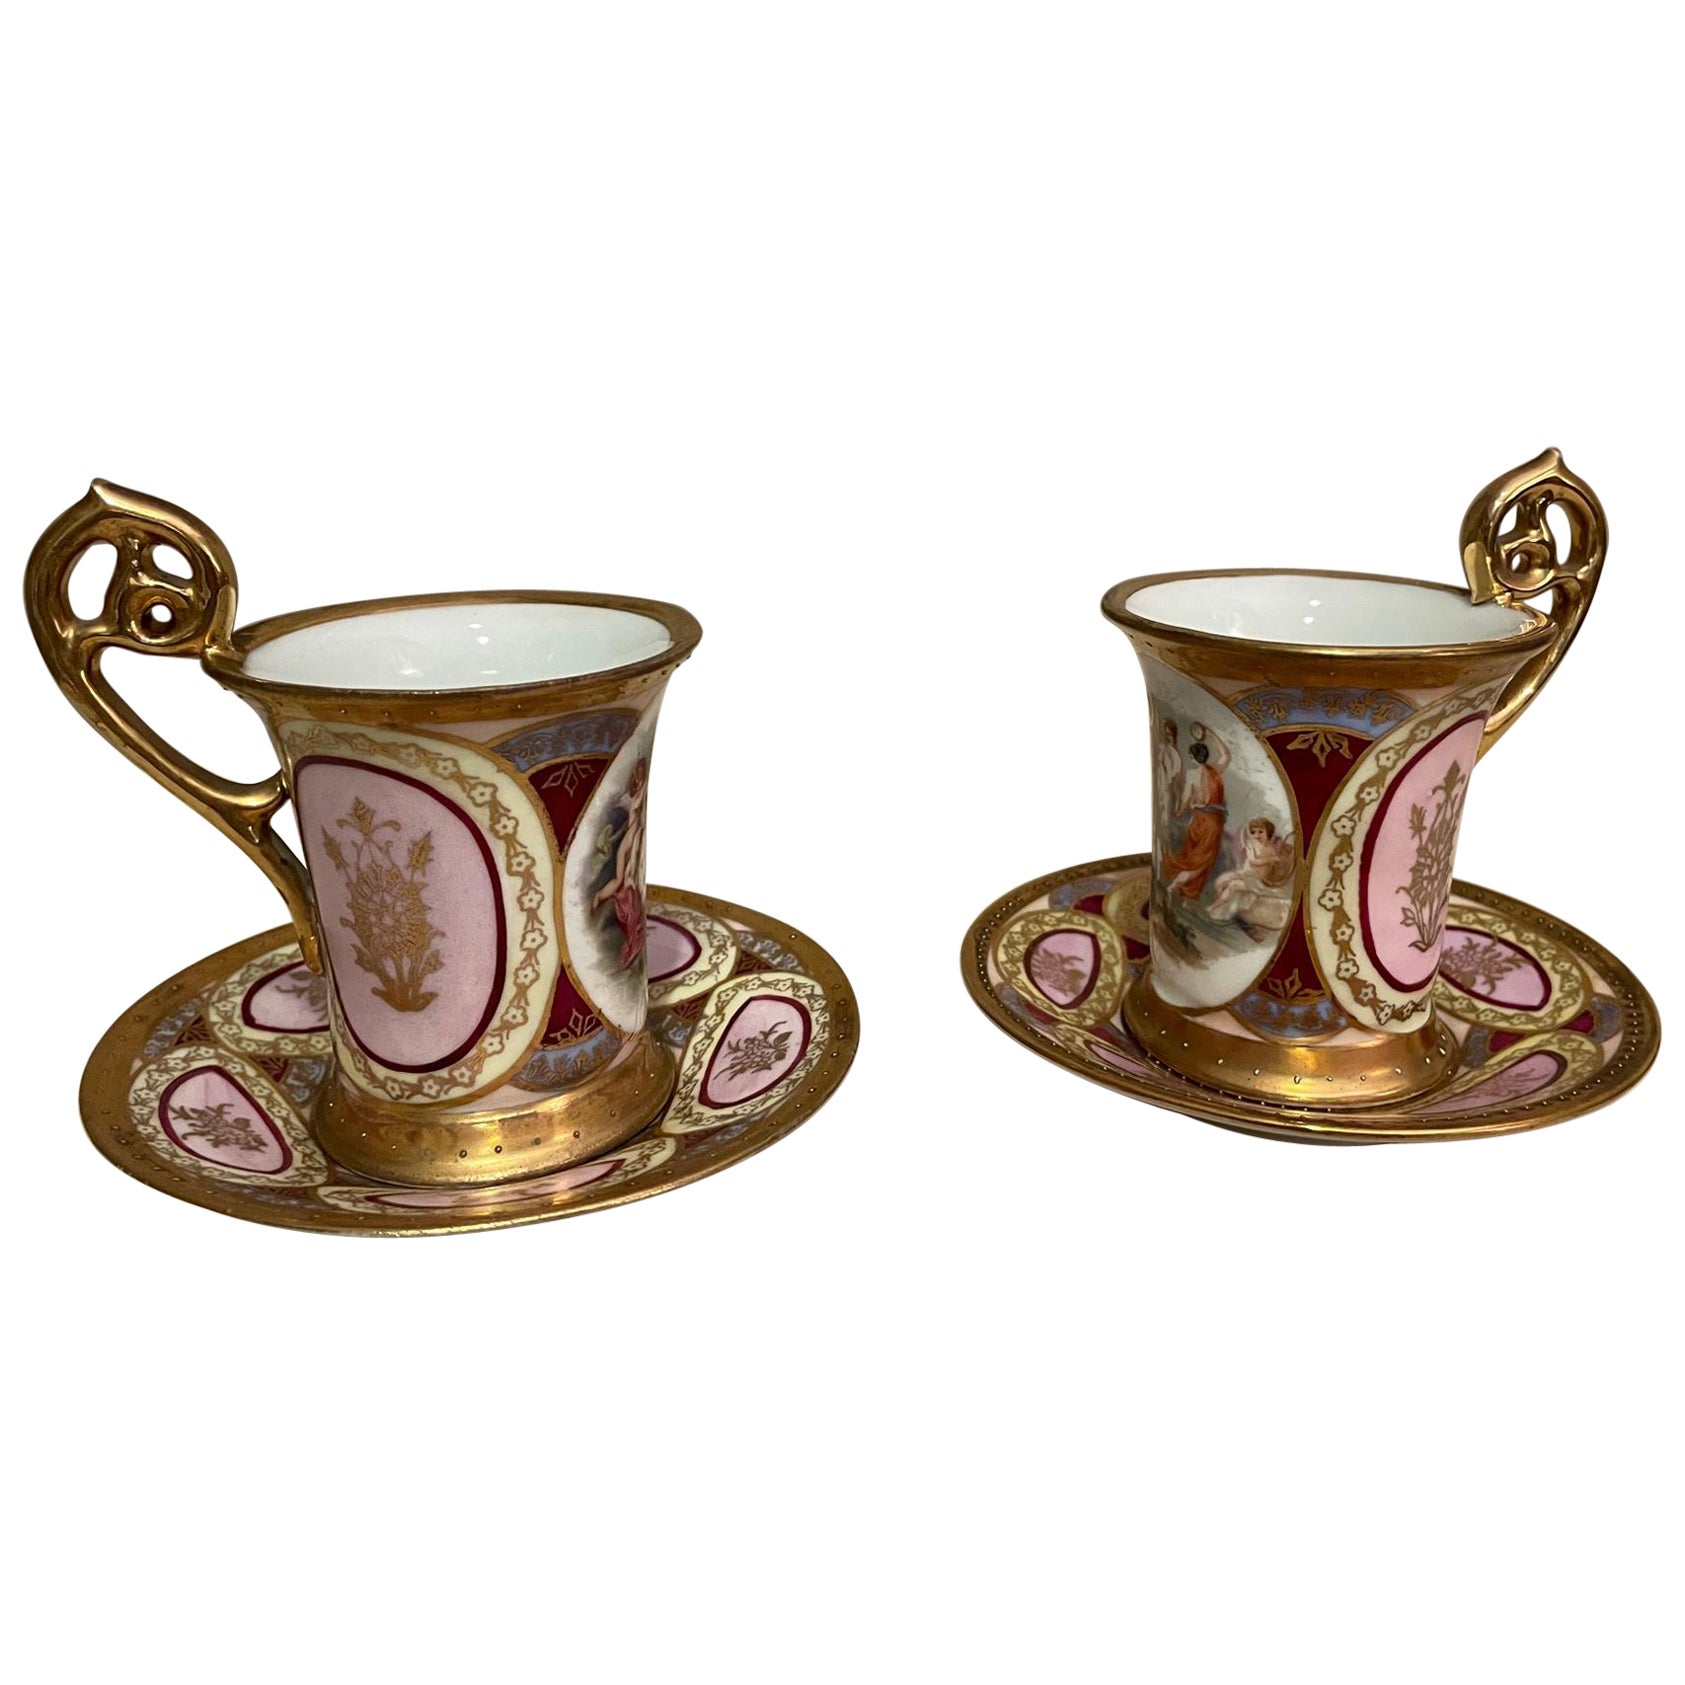 Early 20th Century Vienna Porcelain Set of Tea Cups, 1900s